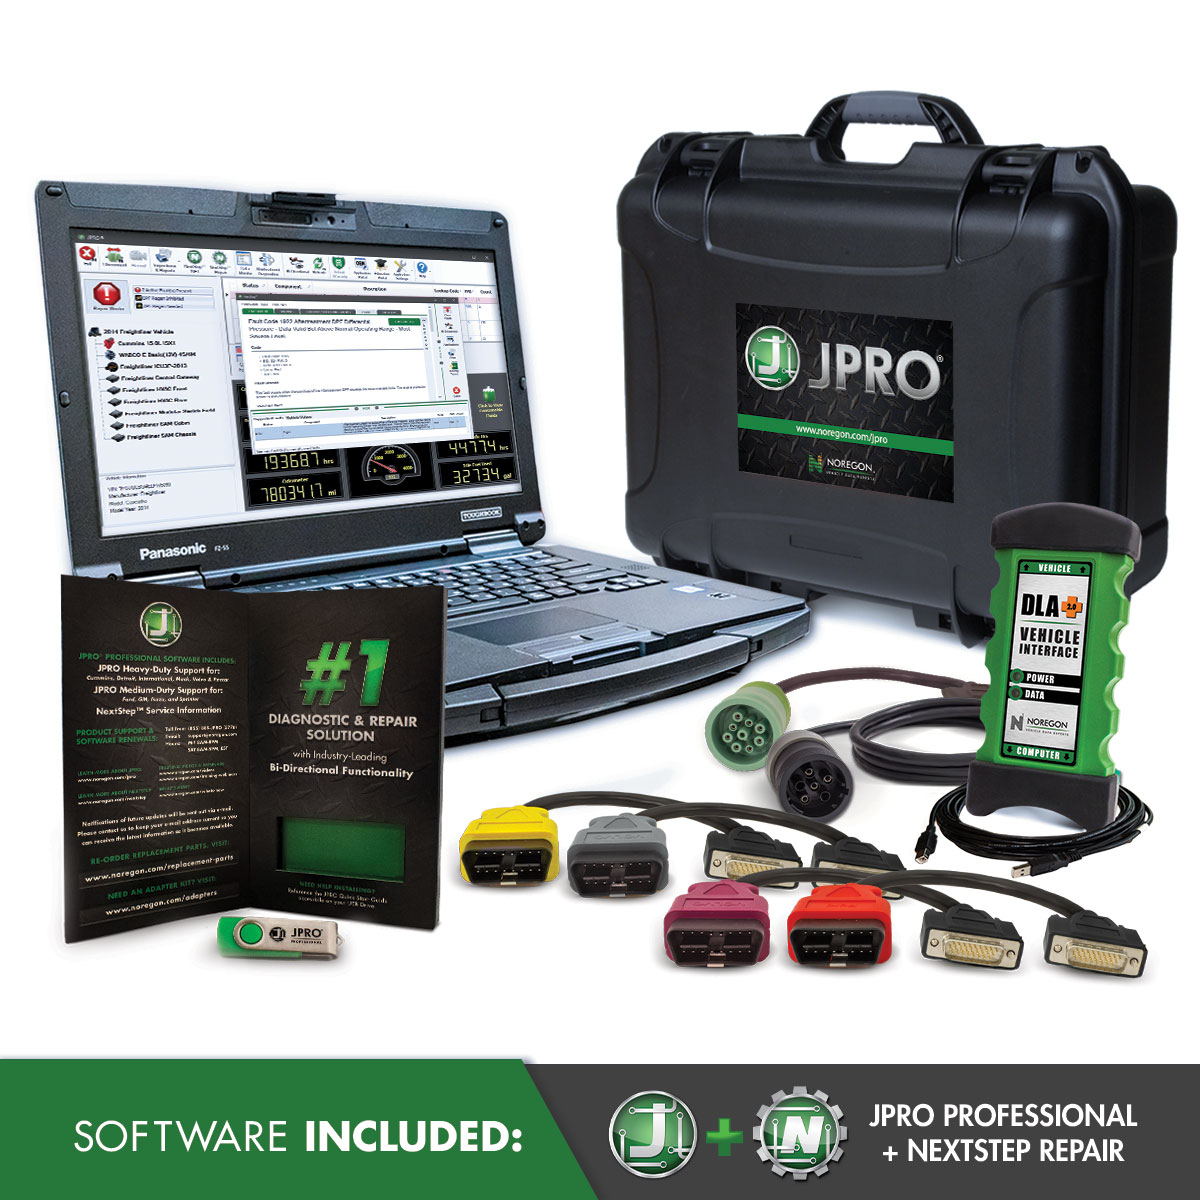 JPRO with Fault Guidance and NextStep Repair Diagnostic Toolbox w/ Technician as a Service Bundle 